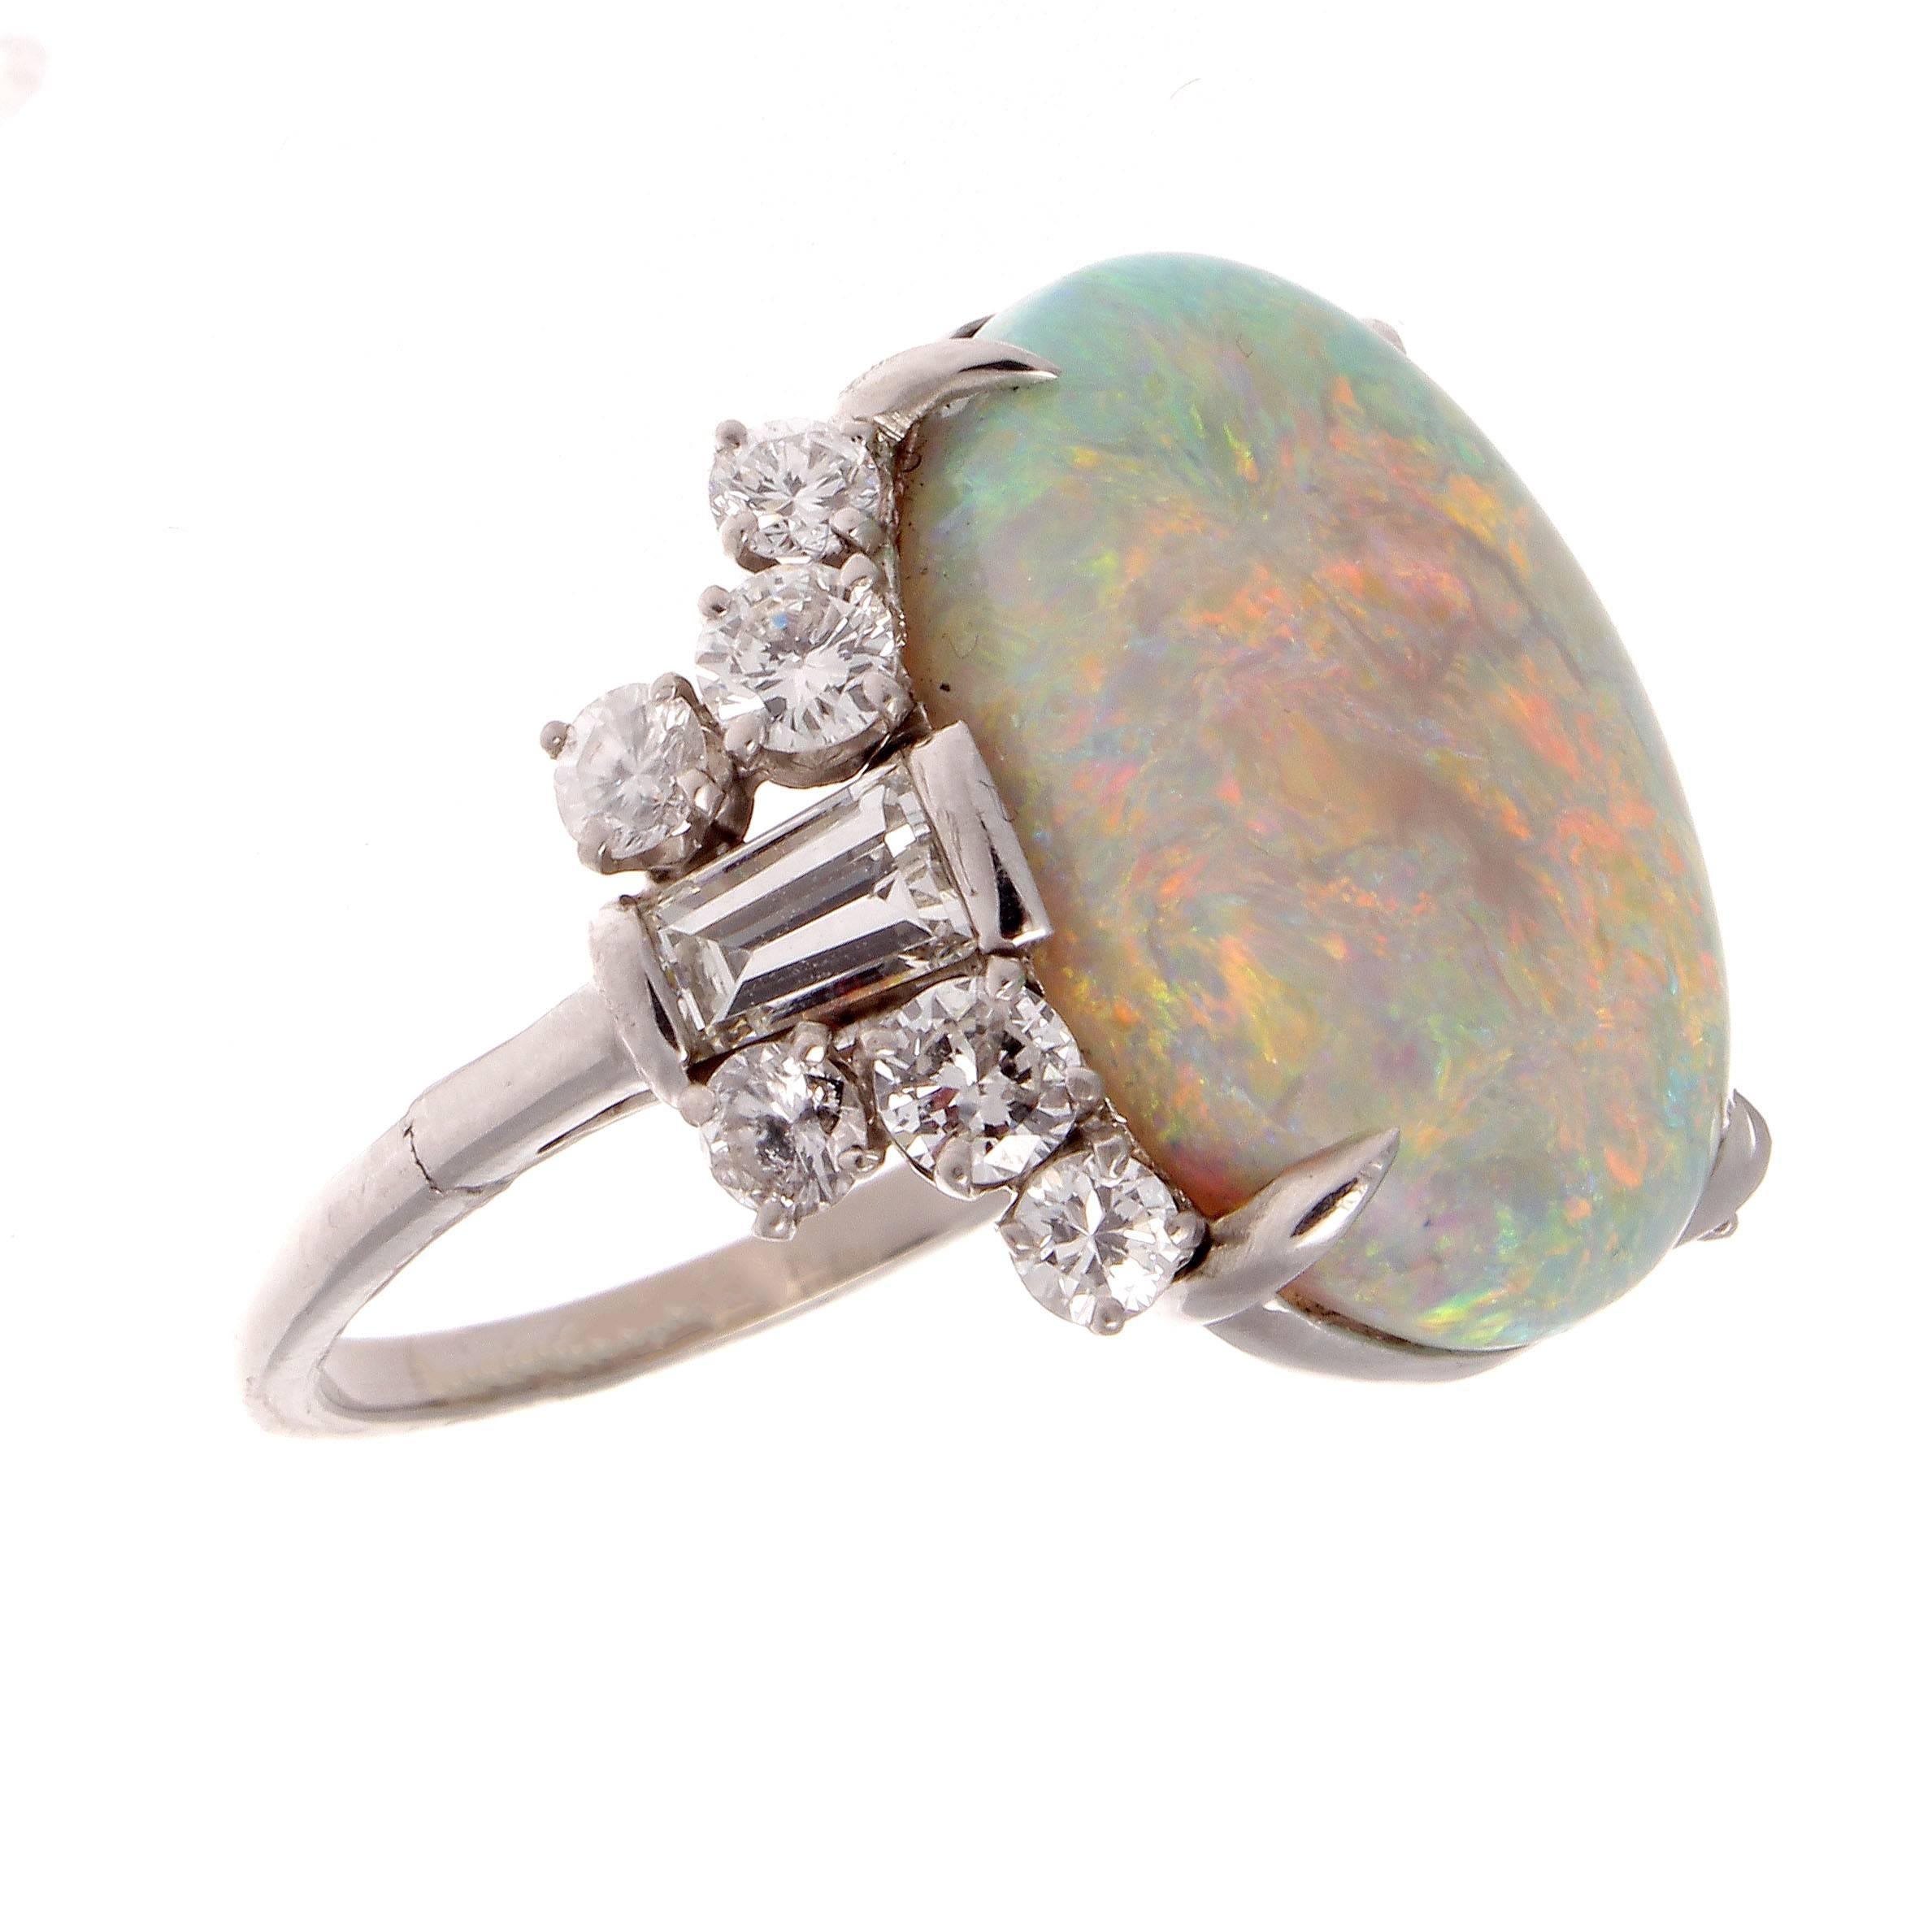 A late retro Opal ring displaying many vibrant colors.  Featuring a 10.88 carat Opal beautifully set in a very stylish ring.  Accented on either side by flares of baguette and round cut diamonds that are E-F color, VS clarity. Hand crafted in